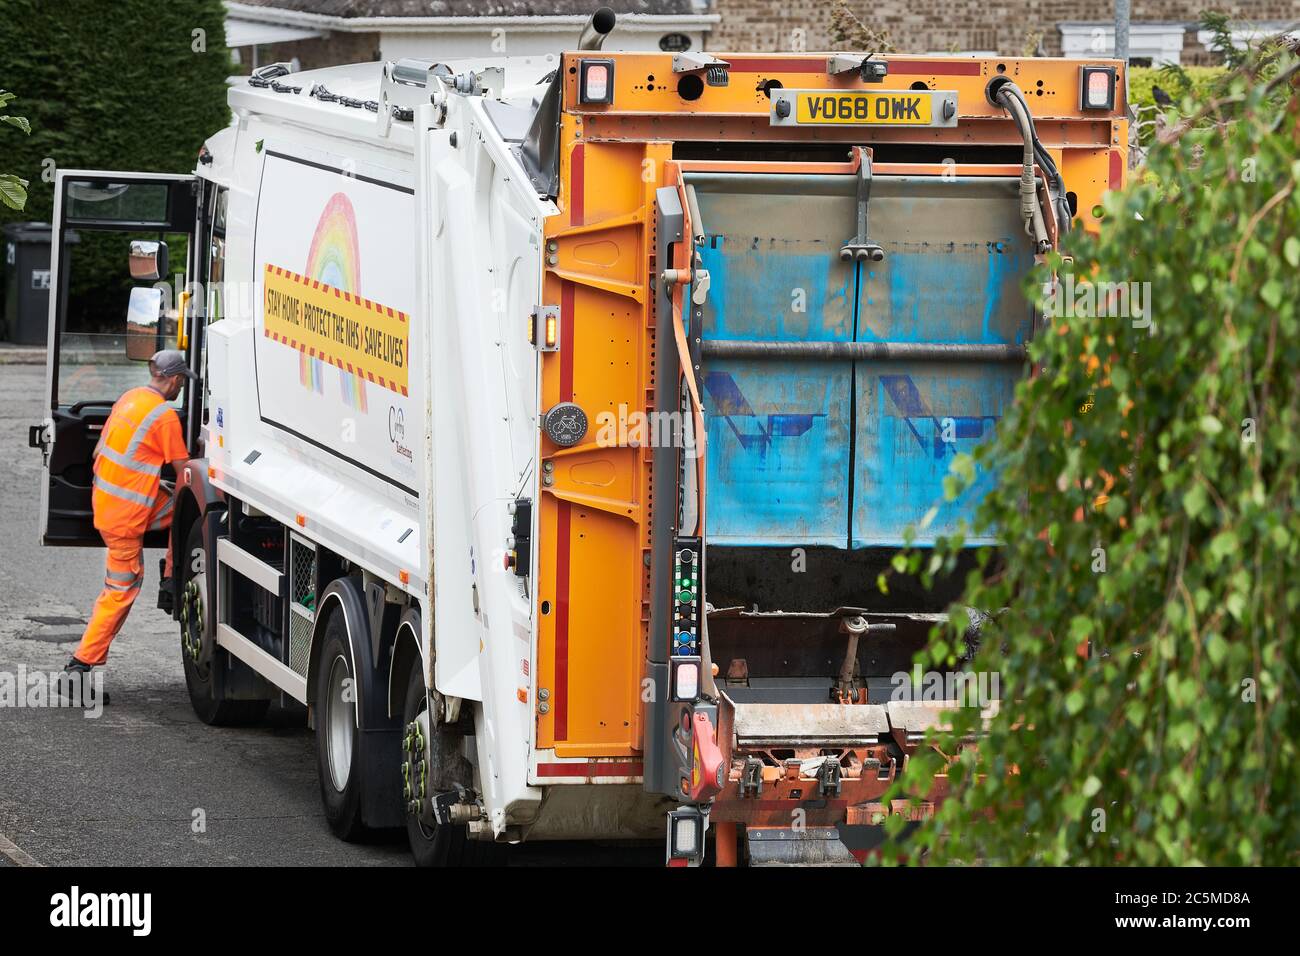 A recycling collector, in high visibility orange clothing, enters a refuse collection lorry after he has emptied a bin of rubbish into the back of it. Stock Photo